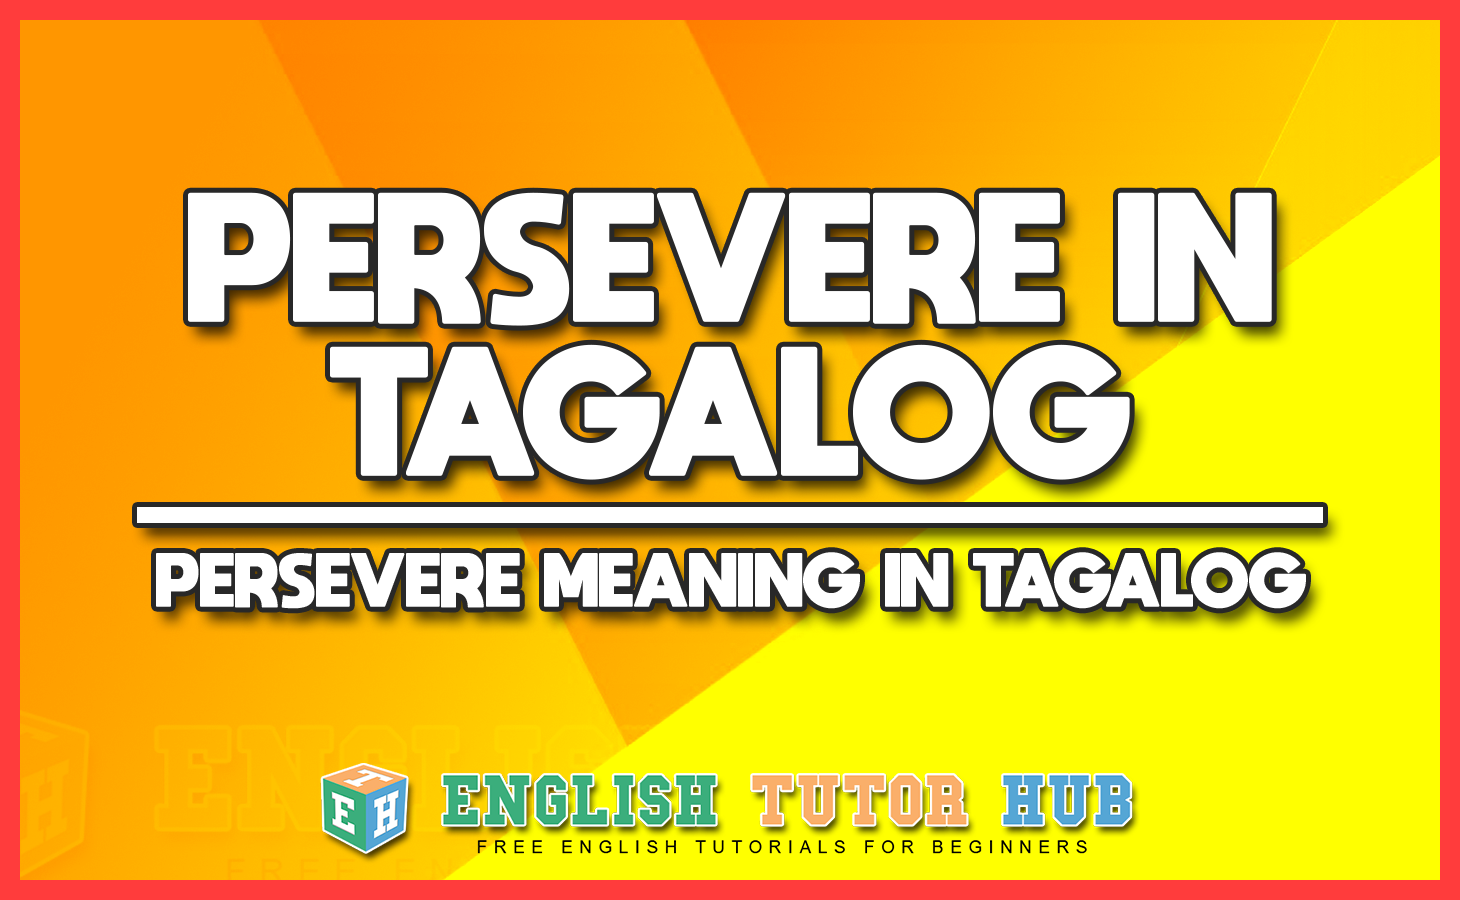 PERSEVERE IN TAGALOG - PERSEVERE MEANING IN TAGALOG